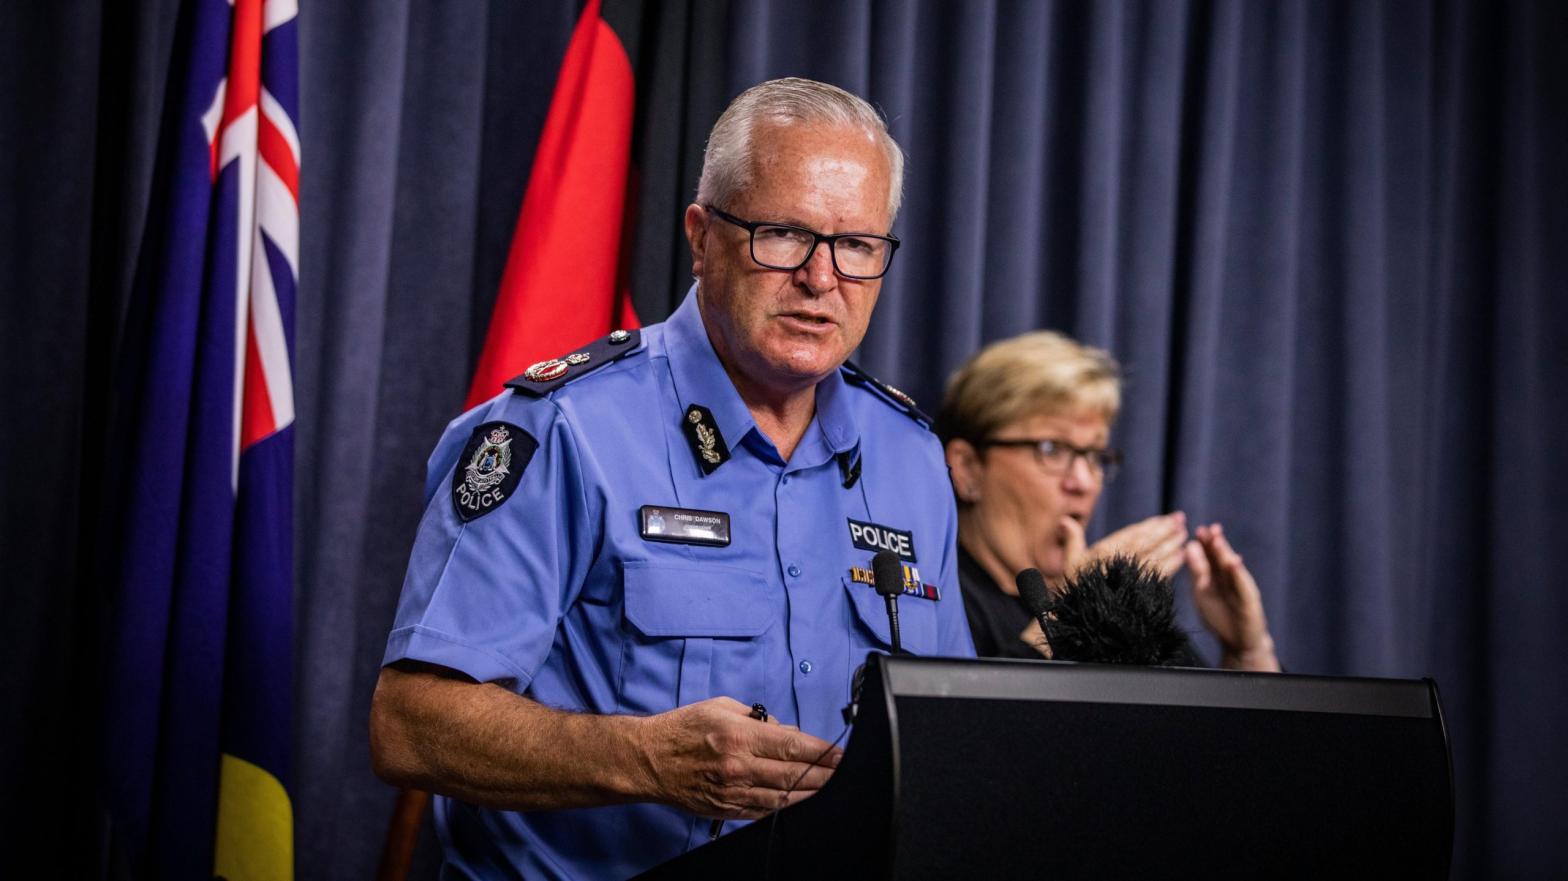 File photo of Western Australia's Police Commissioner Chris Dawson in February 2021. (Photo: Tony McDonough, Getty Images)